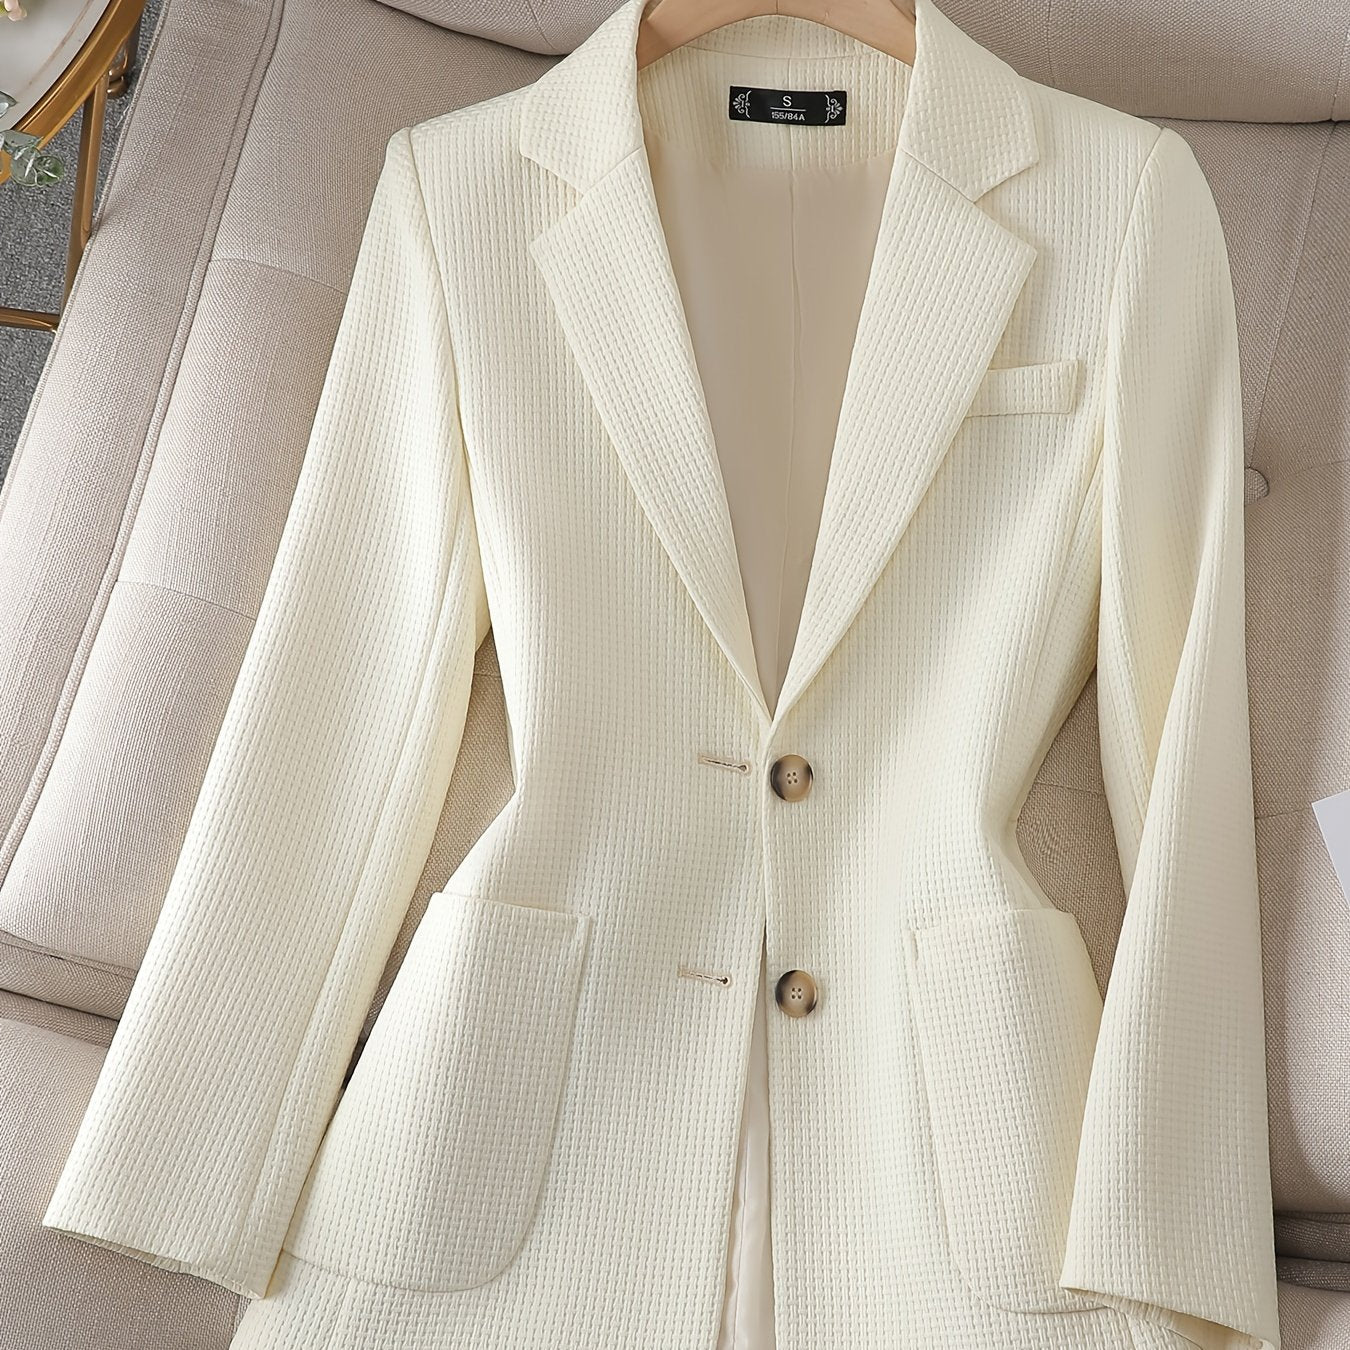 Antmvs Solid Button Front Tunic Blazer, Elegant Lapel Long Notched Neck Sleeve Blazer For Office & Work, Women's Clothing